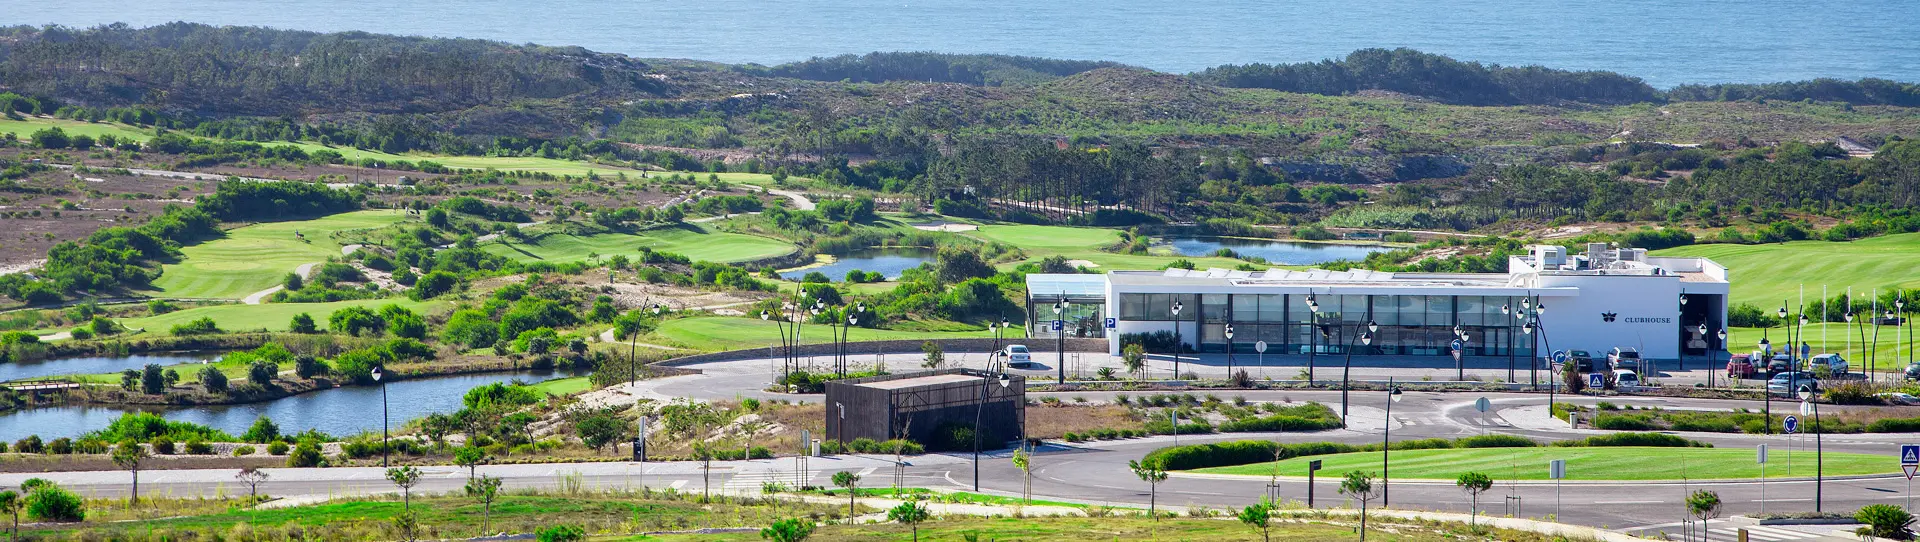 Portugal golf holidays - 3 Nights BB & 2 Golf Rounds<br><b>Groups of 4</b> - Photo 3